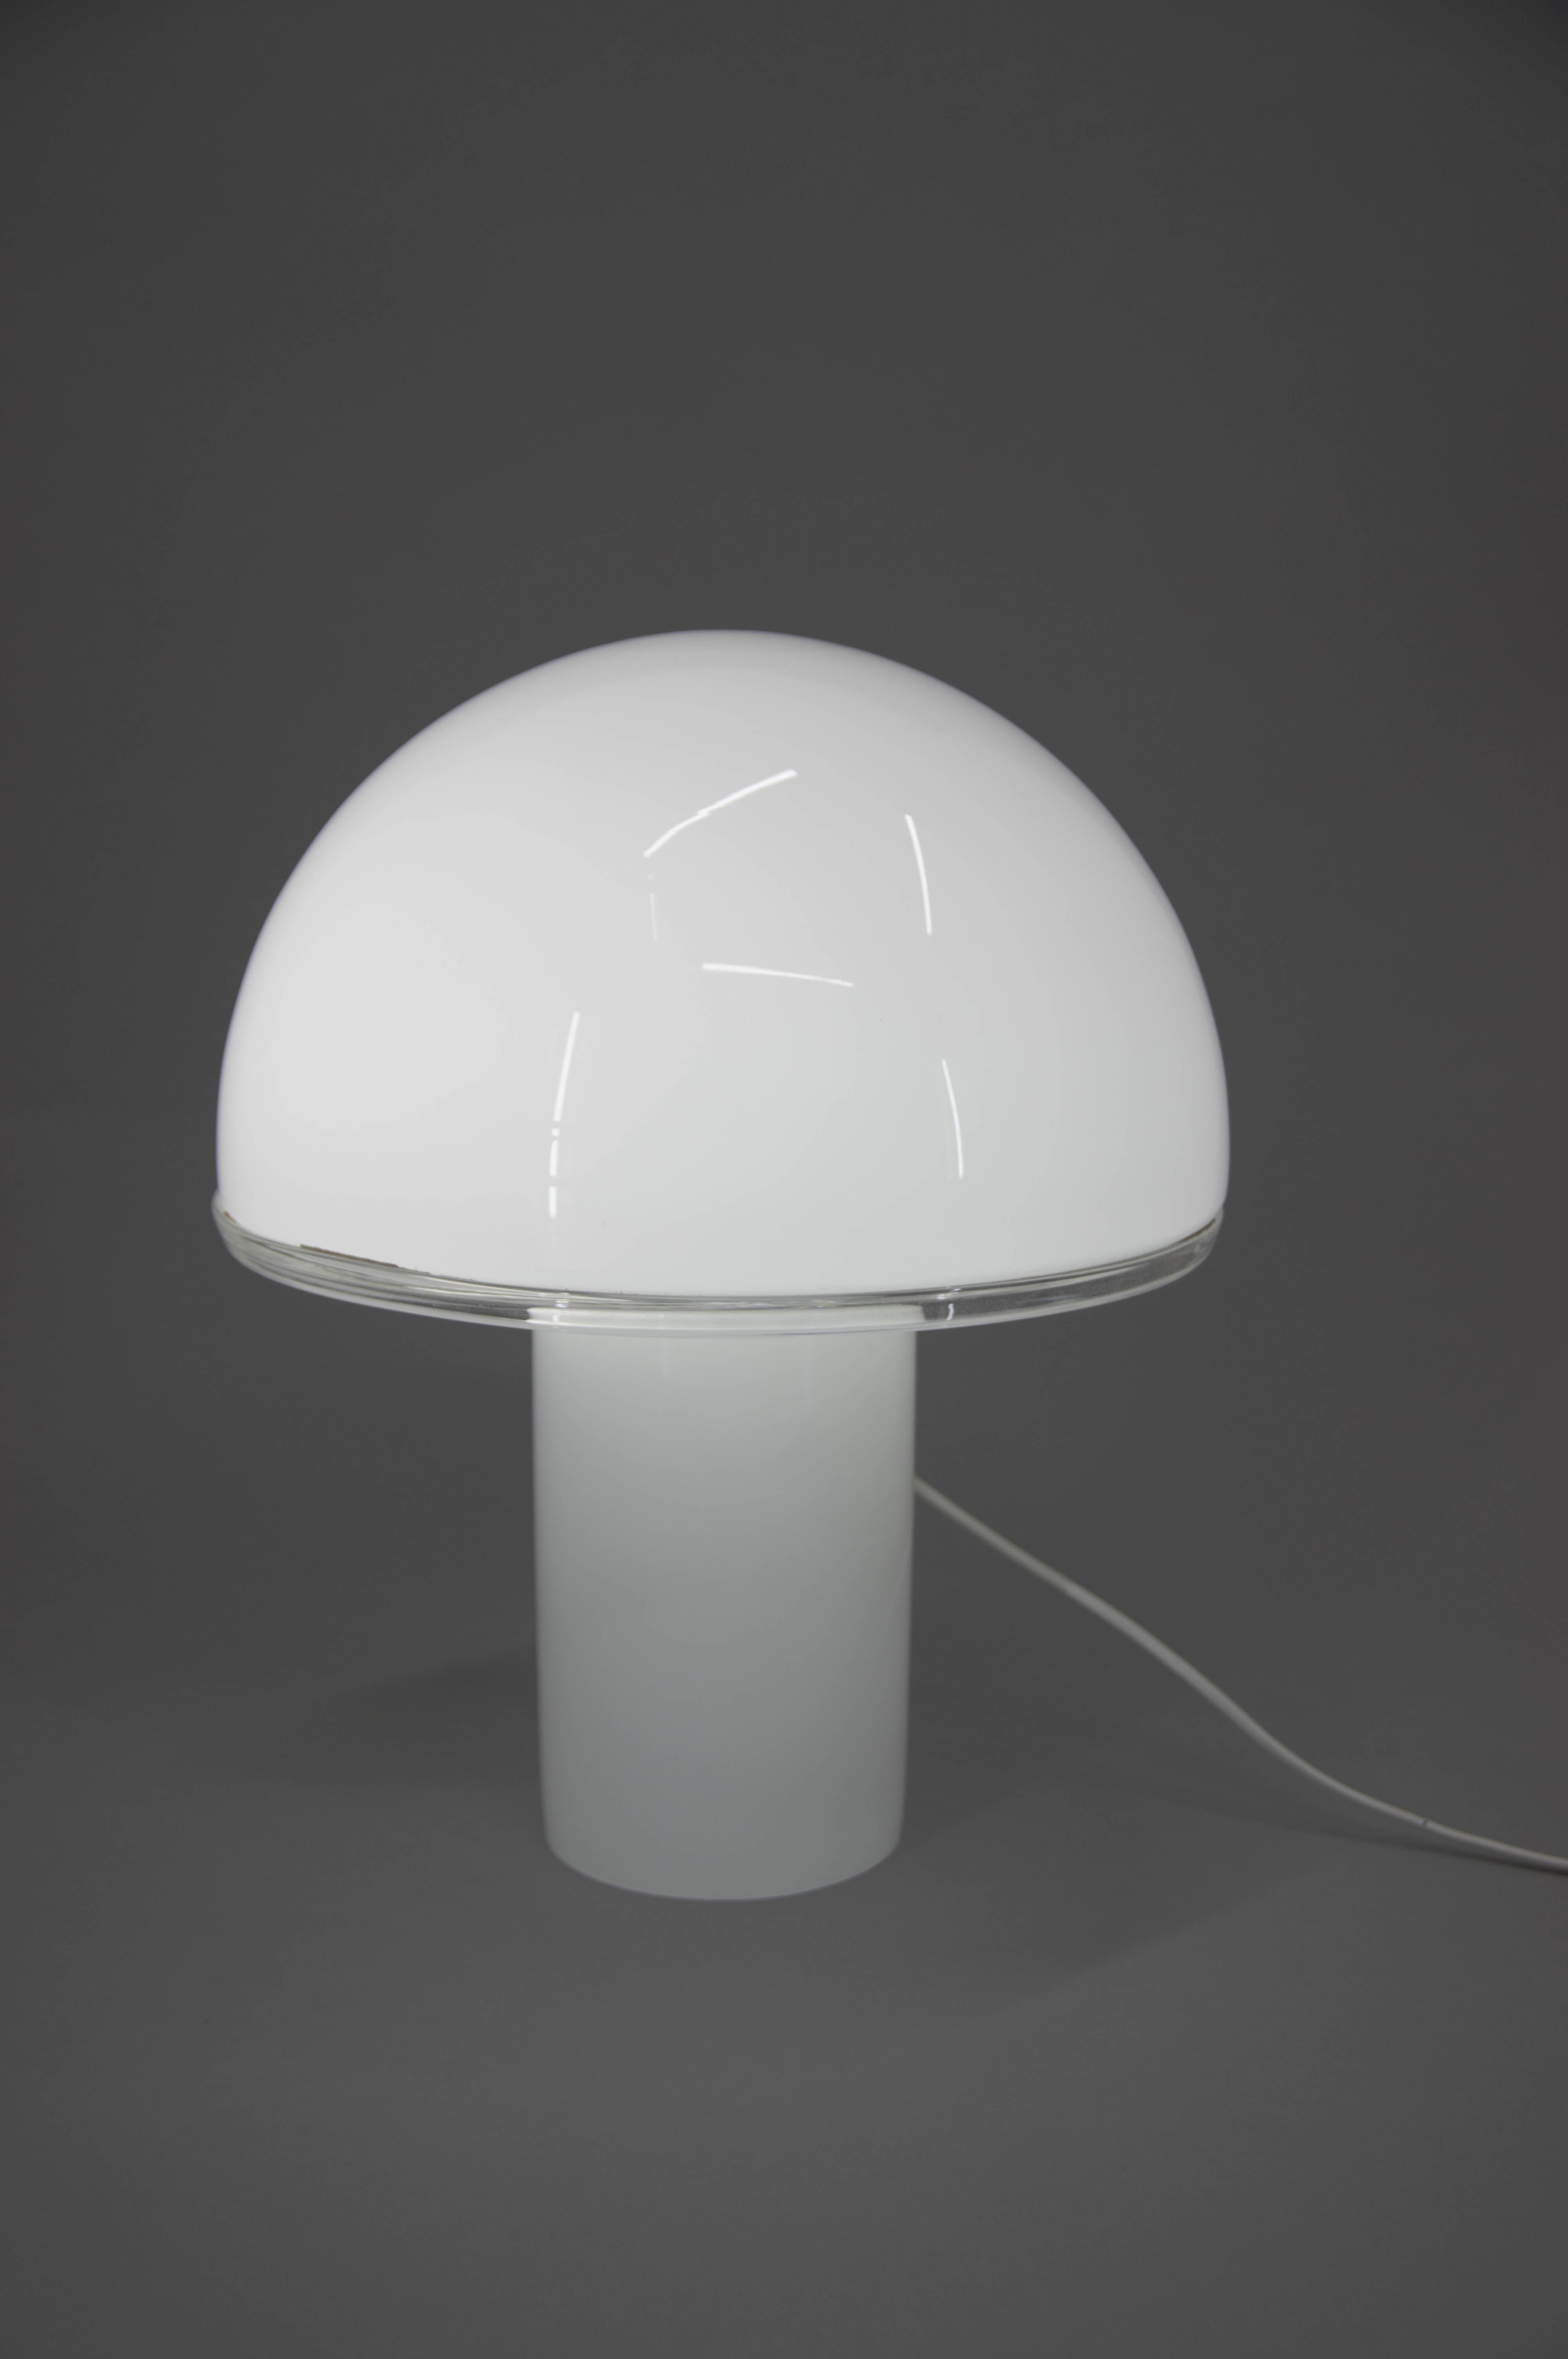 Table or floor lamp by Fontana Arte.
Never used.
Made in Italy in 2010s
1x100W, E25-E27 bulb
US plug adapter included.